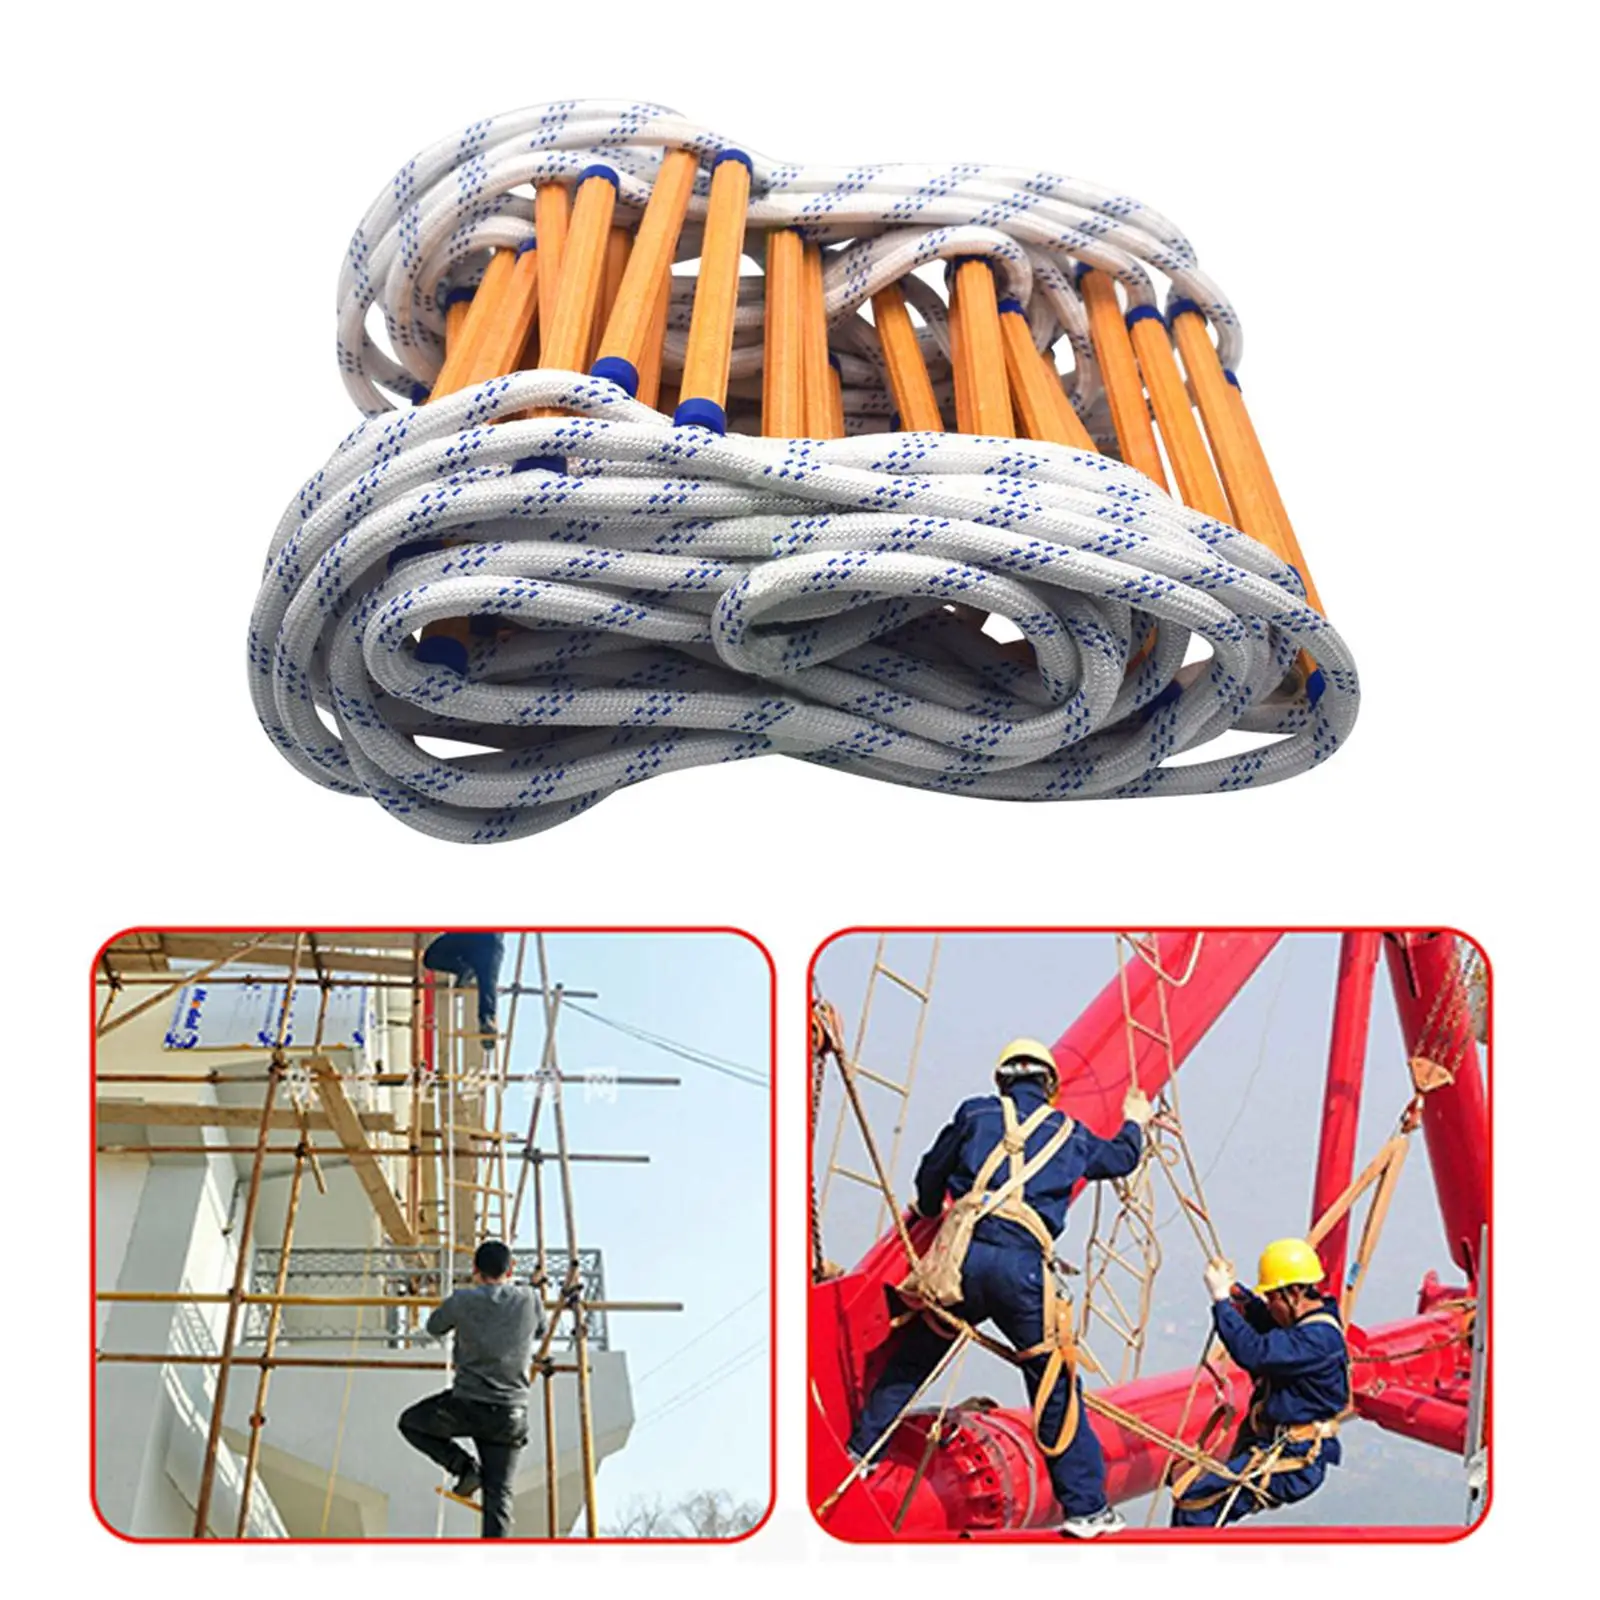 Emergency Escape Ladder Soft Rope Reusable Flame Resistant for Climbing